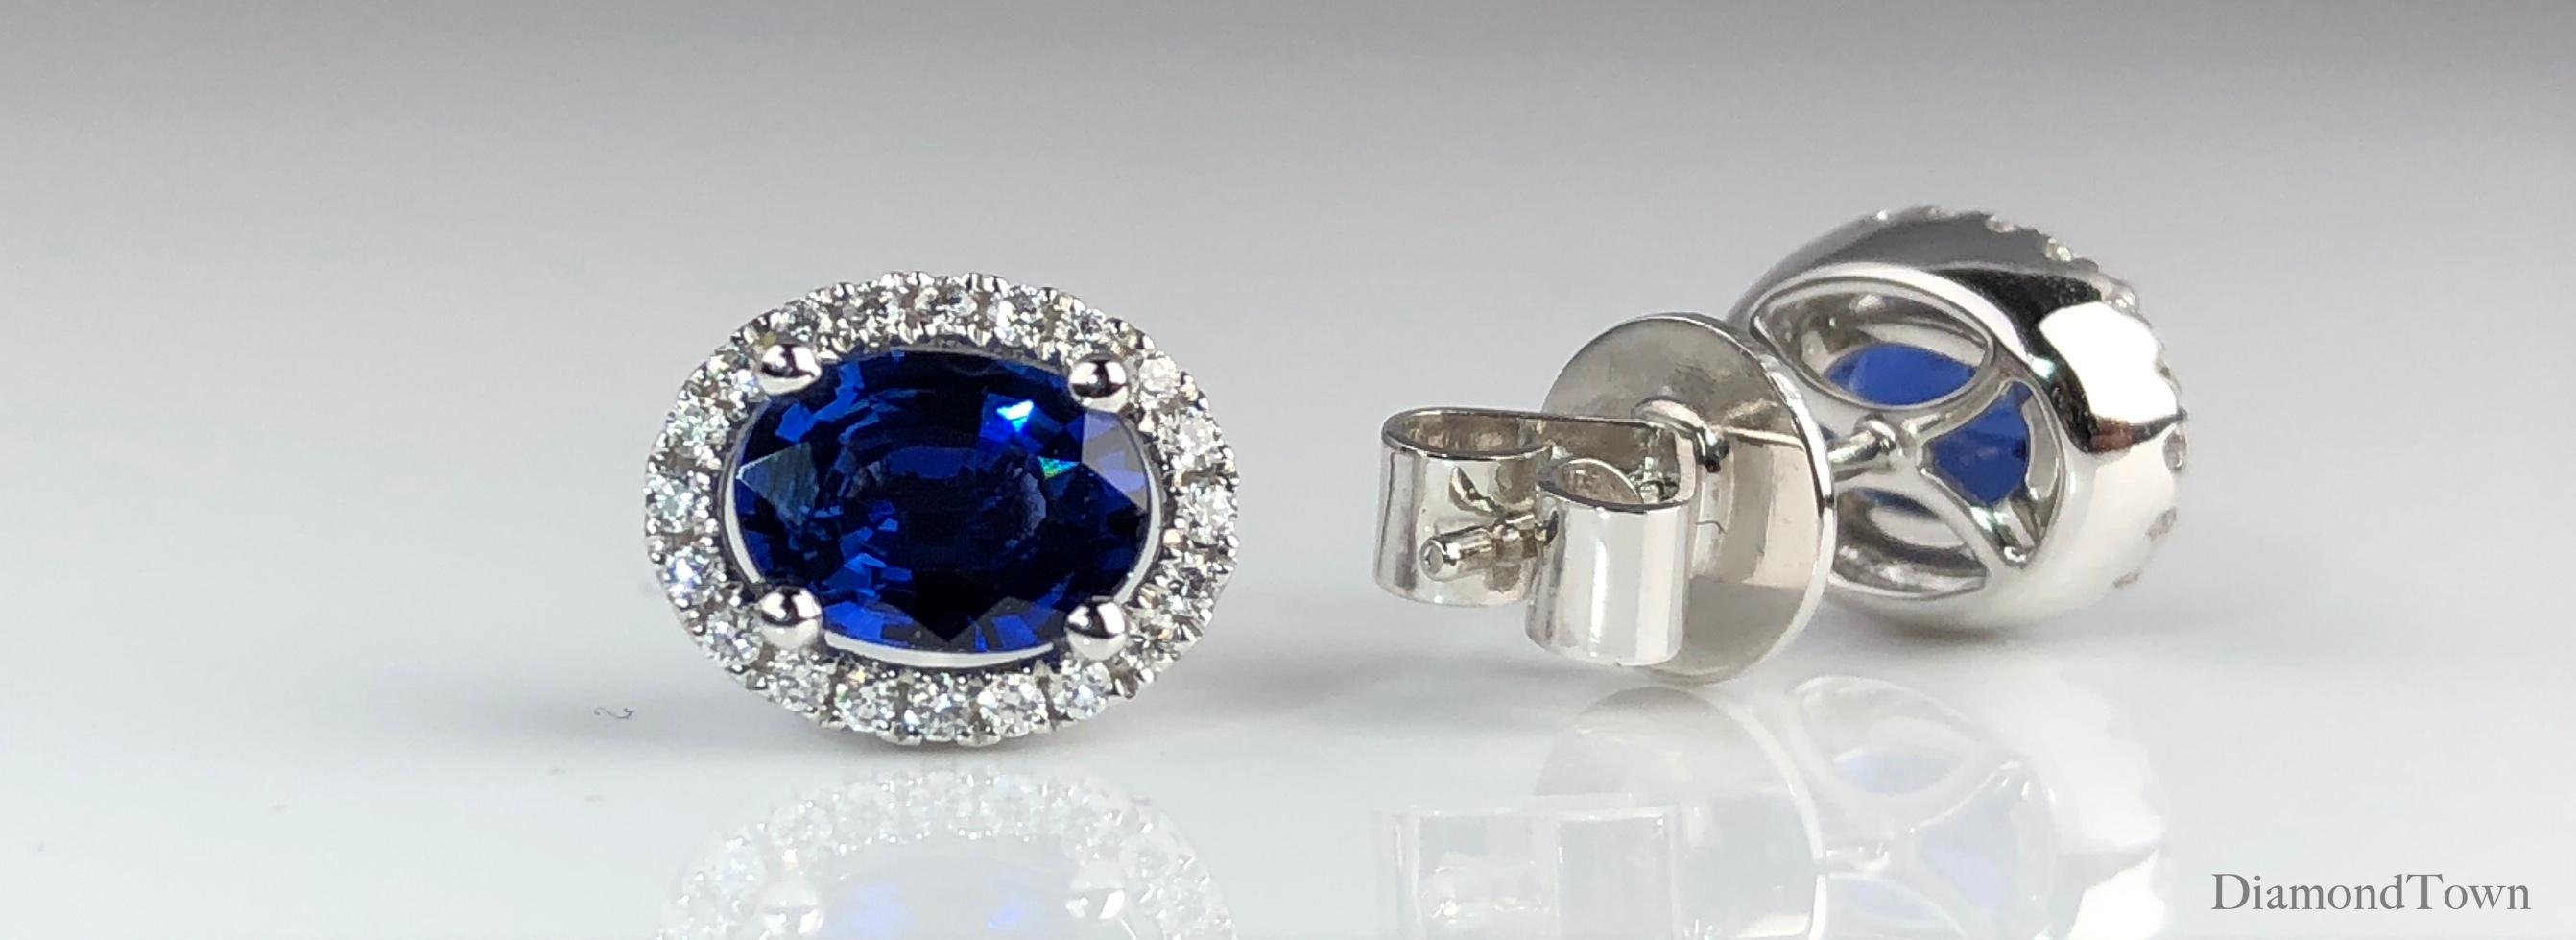 Contemporary 1.65 Carat Oval Cut Blue Sapphire Earrings with Diamond Halo in 18k White Gold